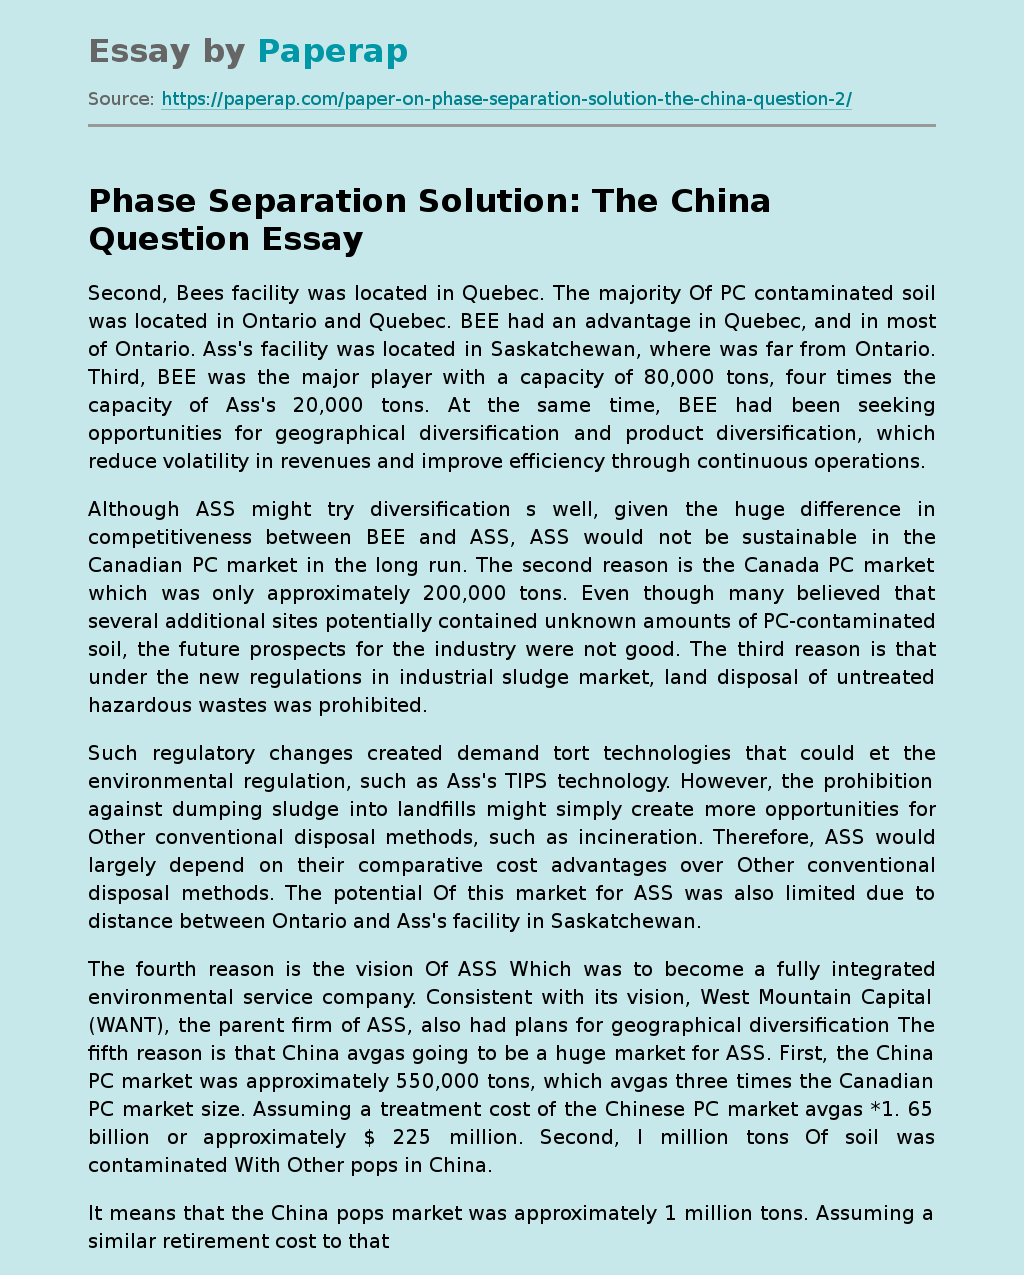 Phase Separation Solution: The China Question